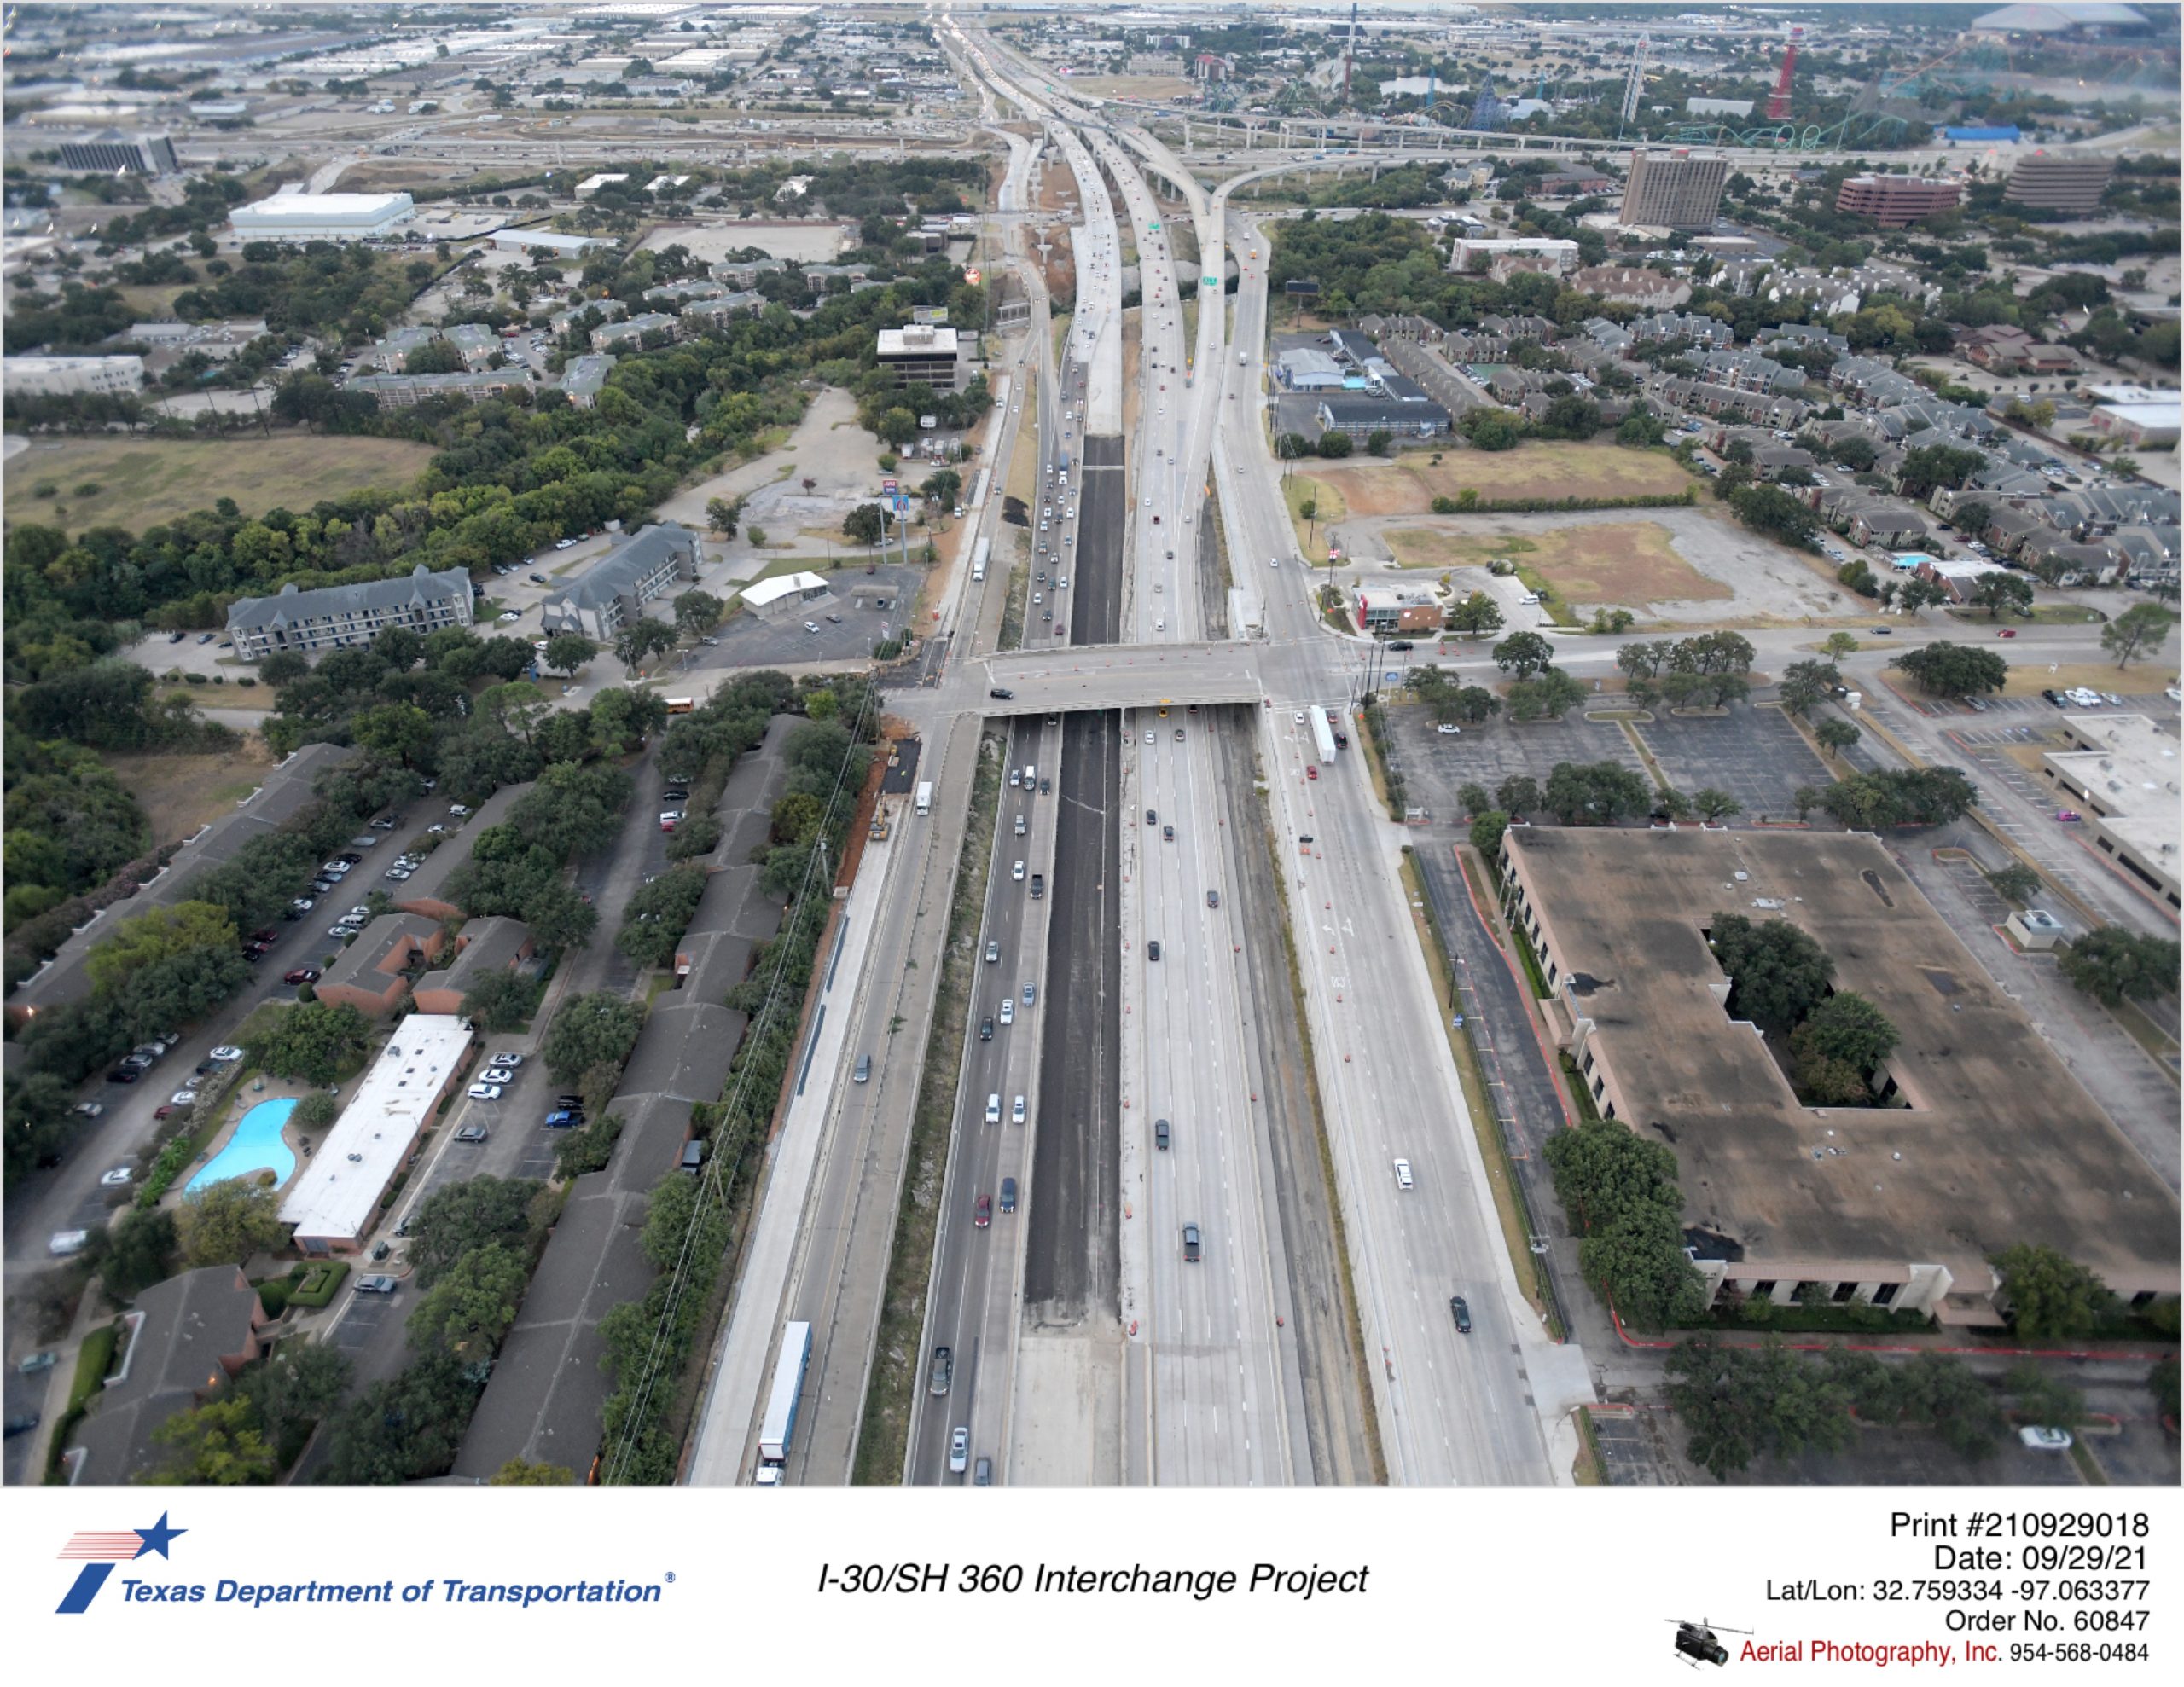 SH 360 looking south at Ave J interchange in midground. New northbound frontage road and mainlane construction shown.